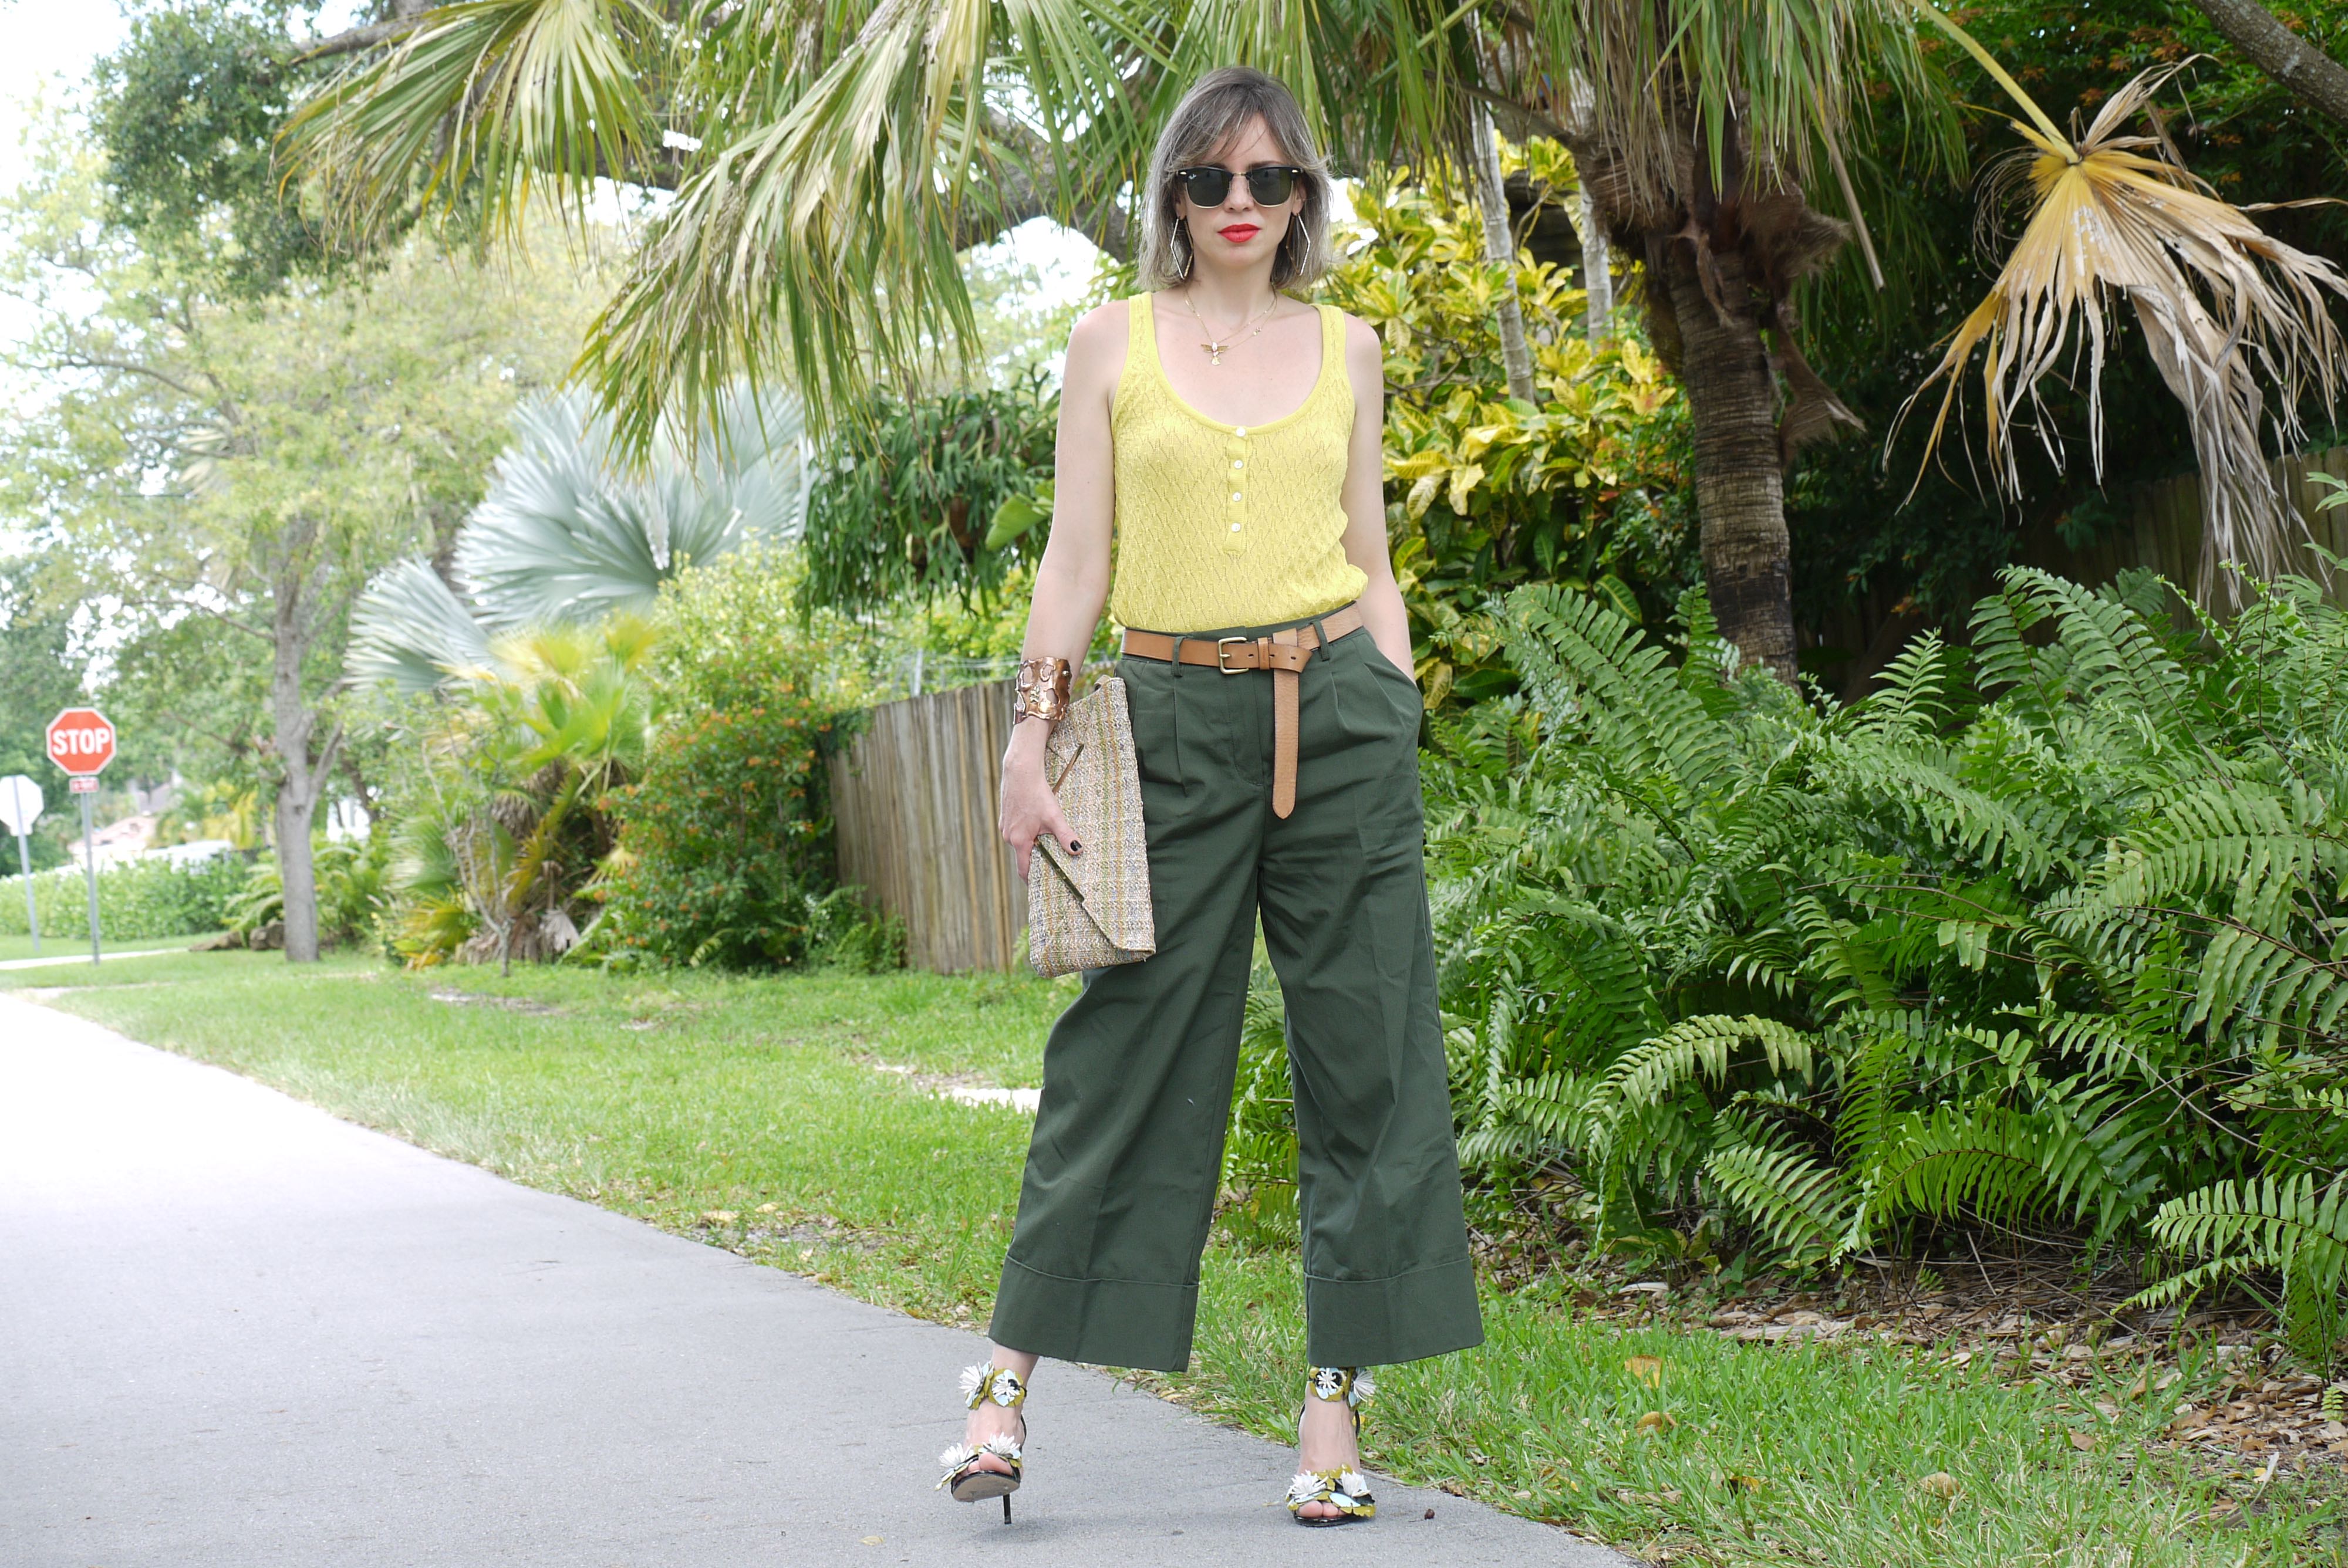 Alba Marina fashion blogger from Mylovelypeople blog shares with you how to combine a culottes pants from WhoWhatWear